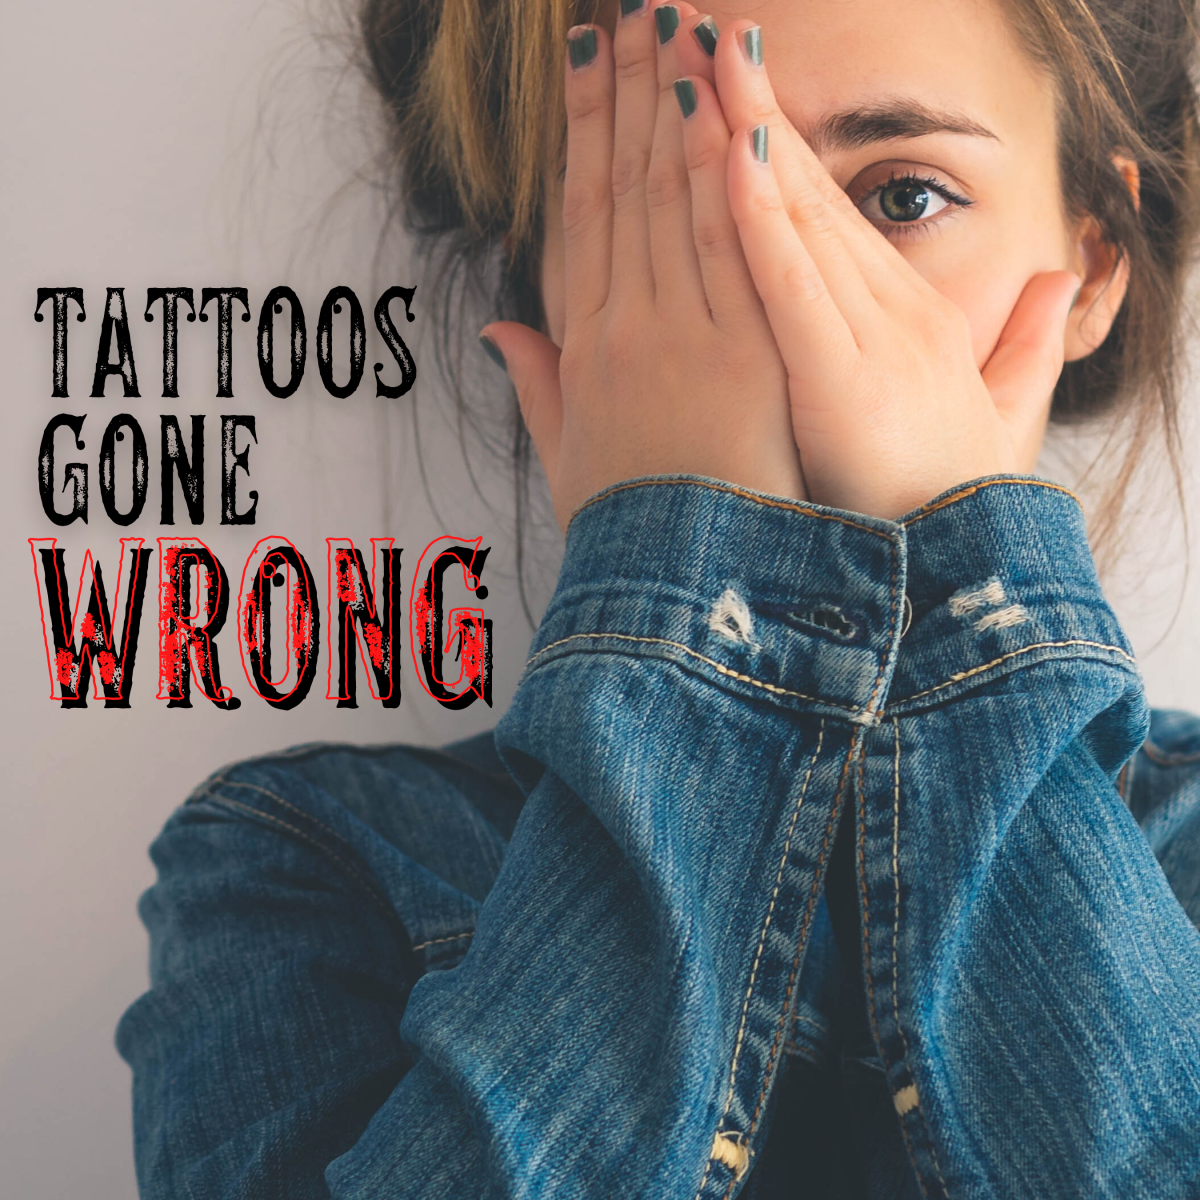 A list of tattoo mistakes to avoid.